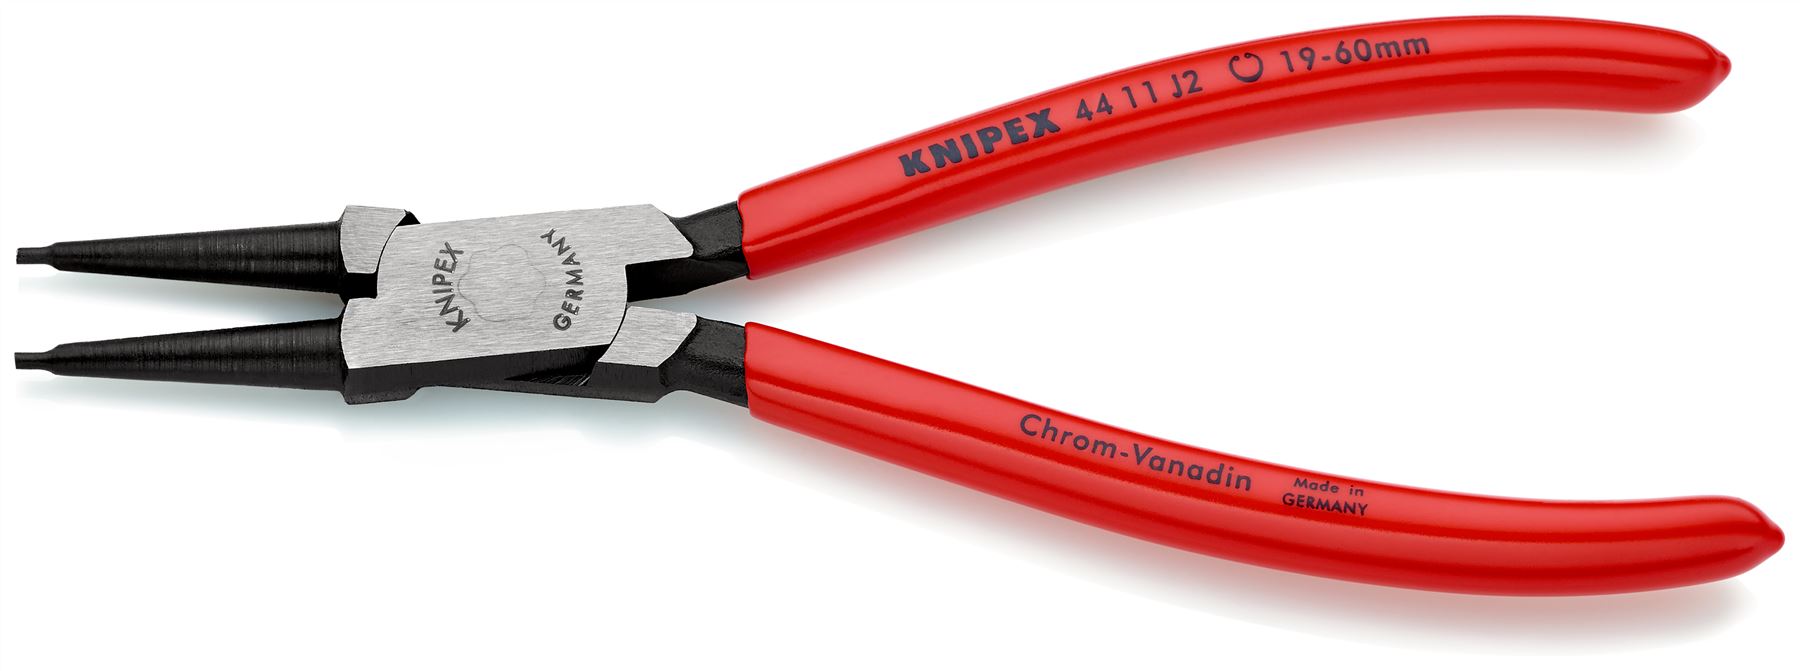 KNIPEX Circlip Pliers for Internal Circlips in Bore Holes 180mm 1.8mm Diameter Tips 44 11 J2 SB